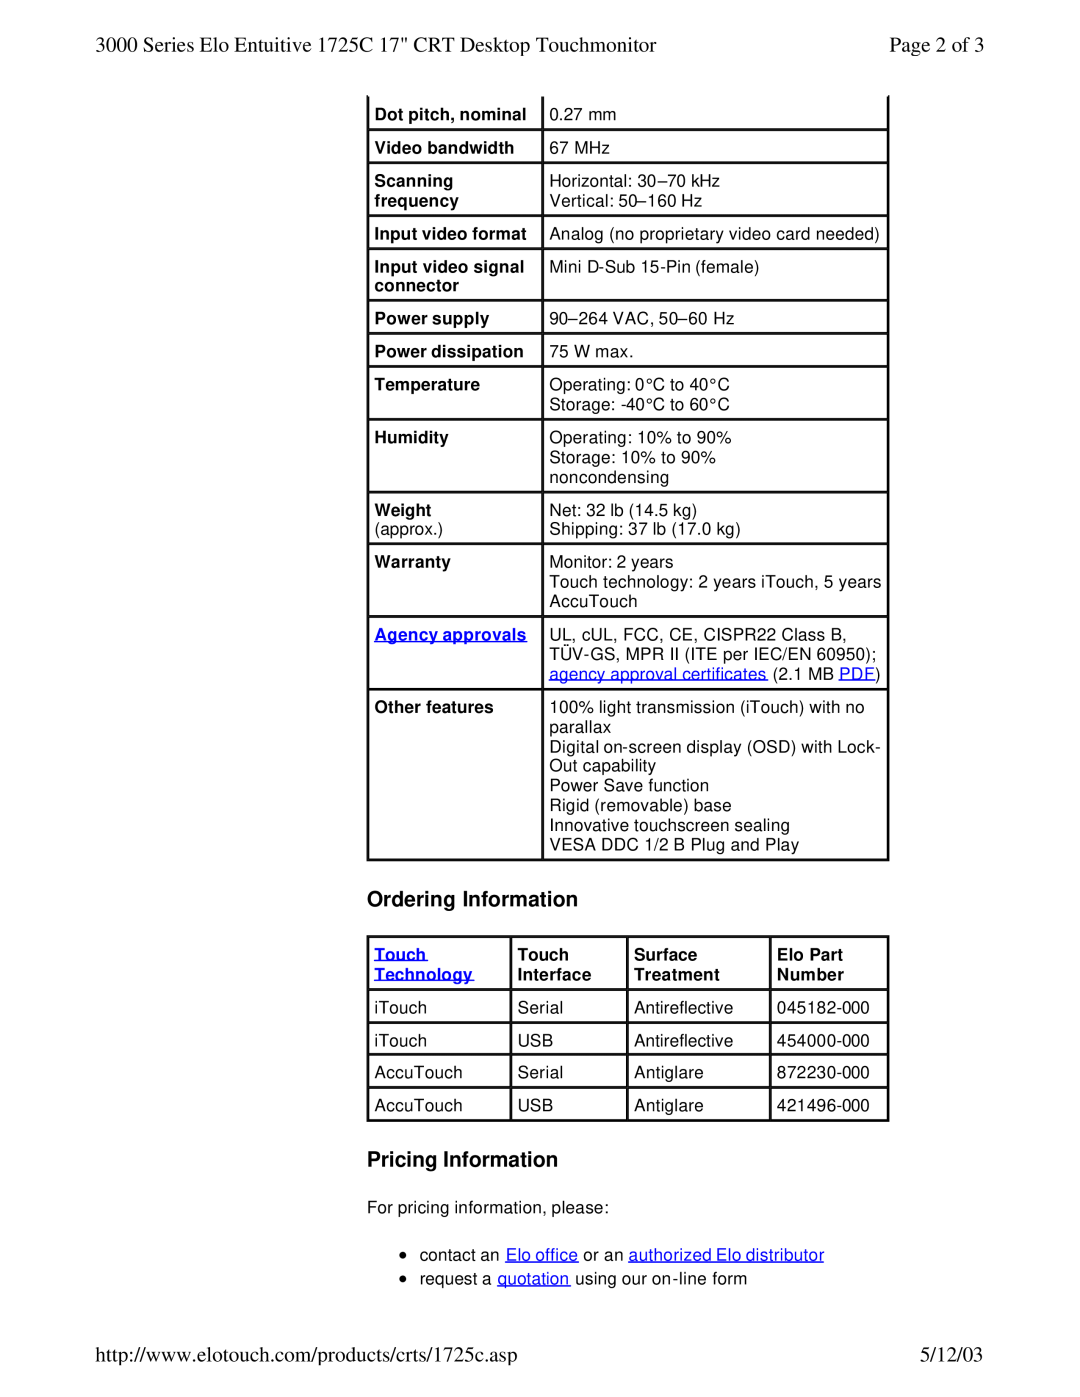 Elo TouchSystems 1725C Page 2 of, Ordering Information, Pricing Information, 5/12/03, Agency approvals, Touch, Technology 